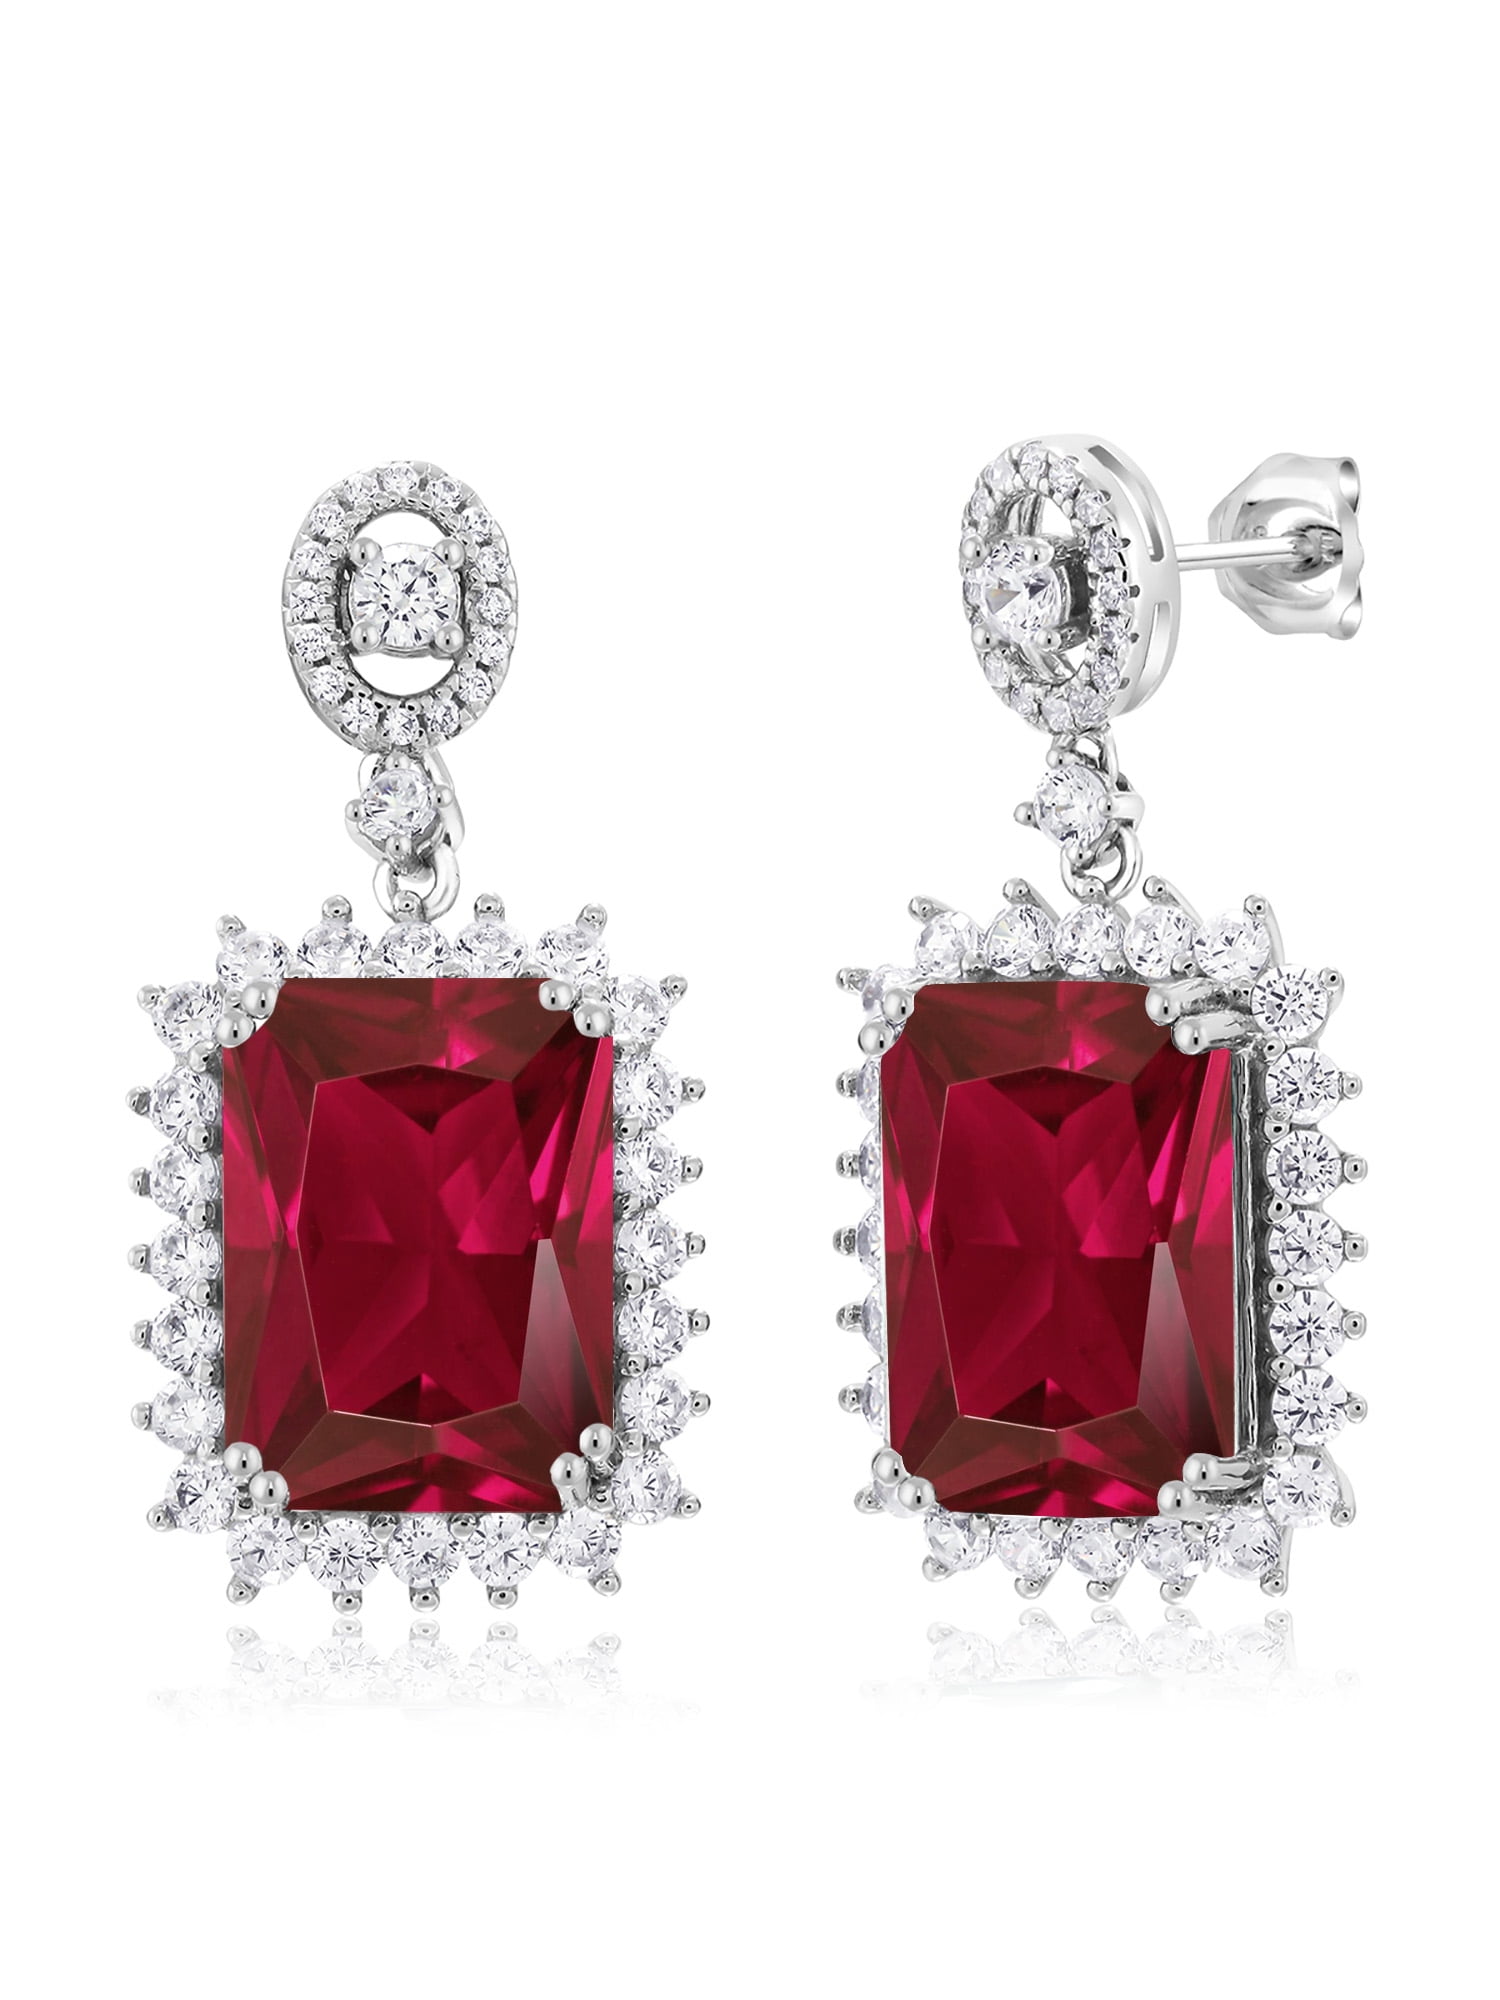 Gem Stone King 1.59 Ct Round Red Created Ruby Yellow Gold Plated Silver Earrings with Jackets 